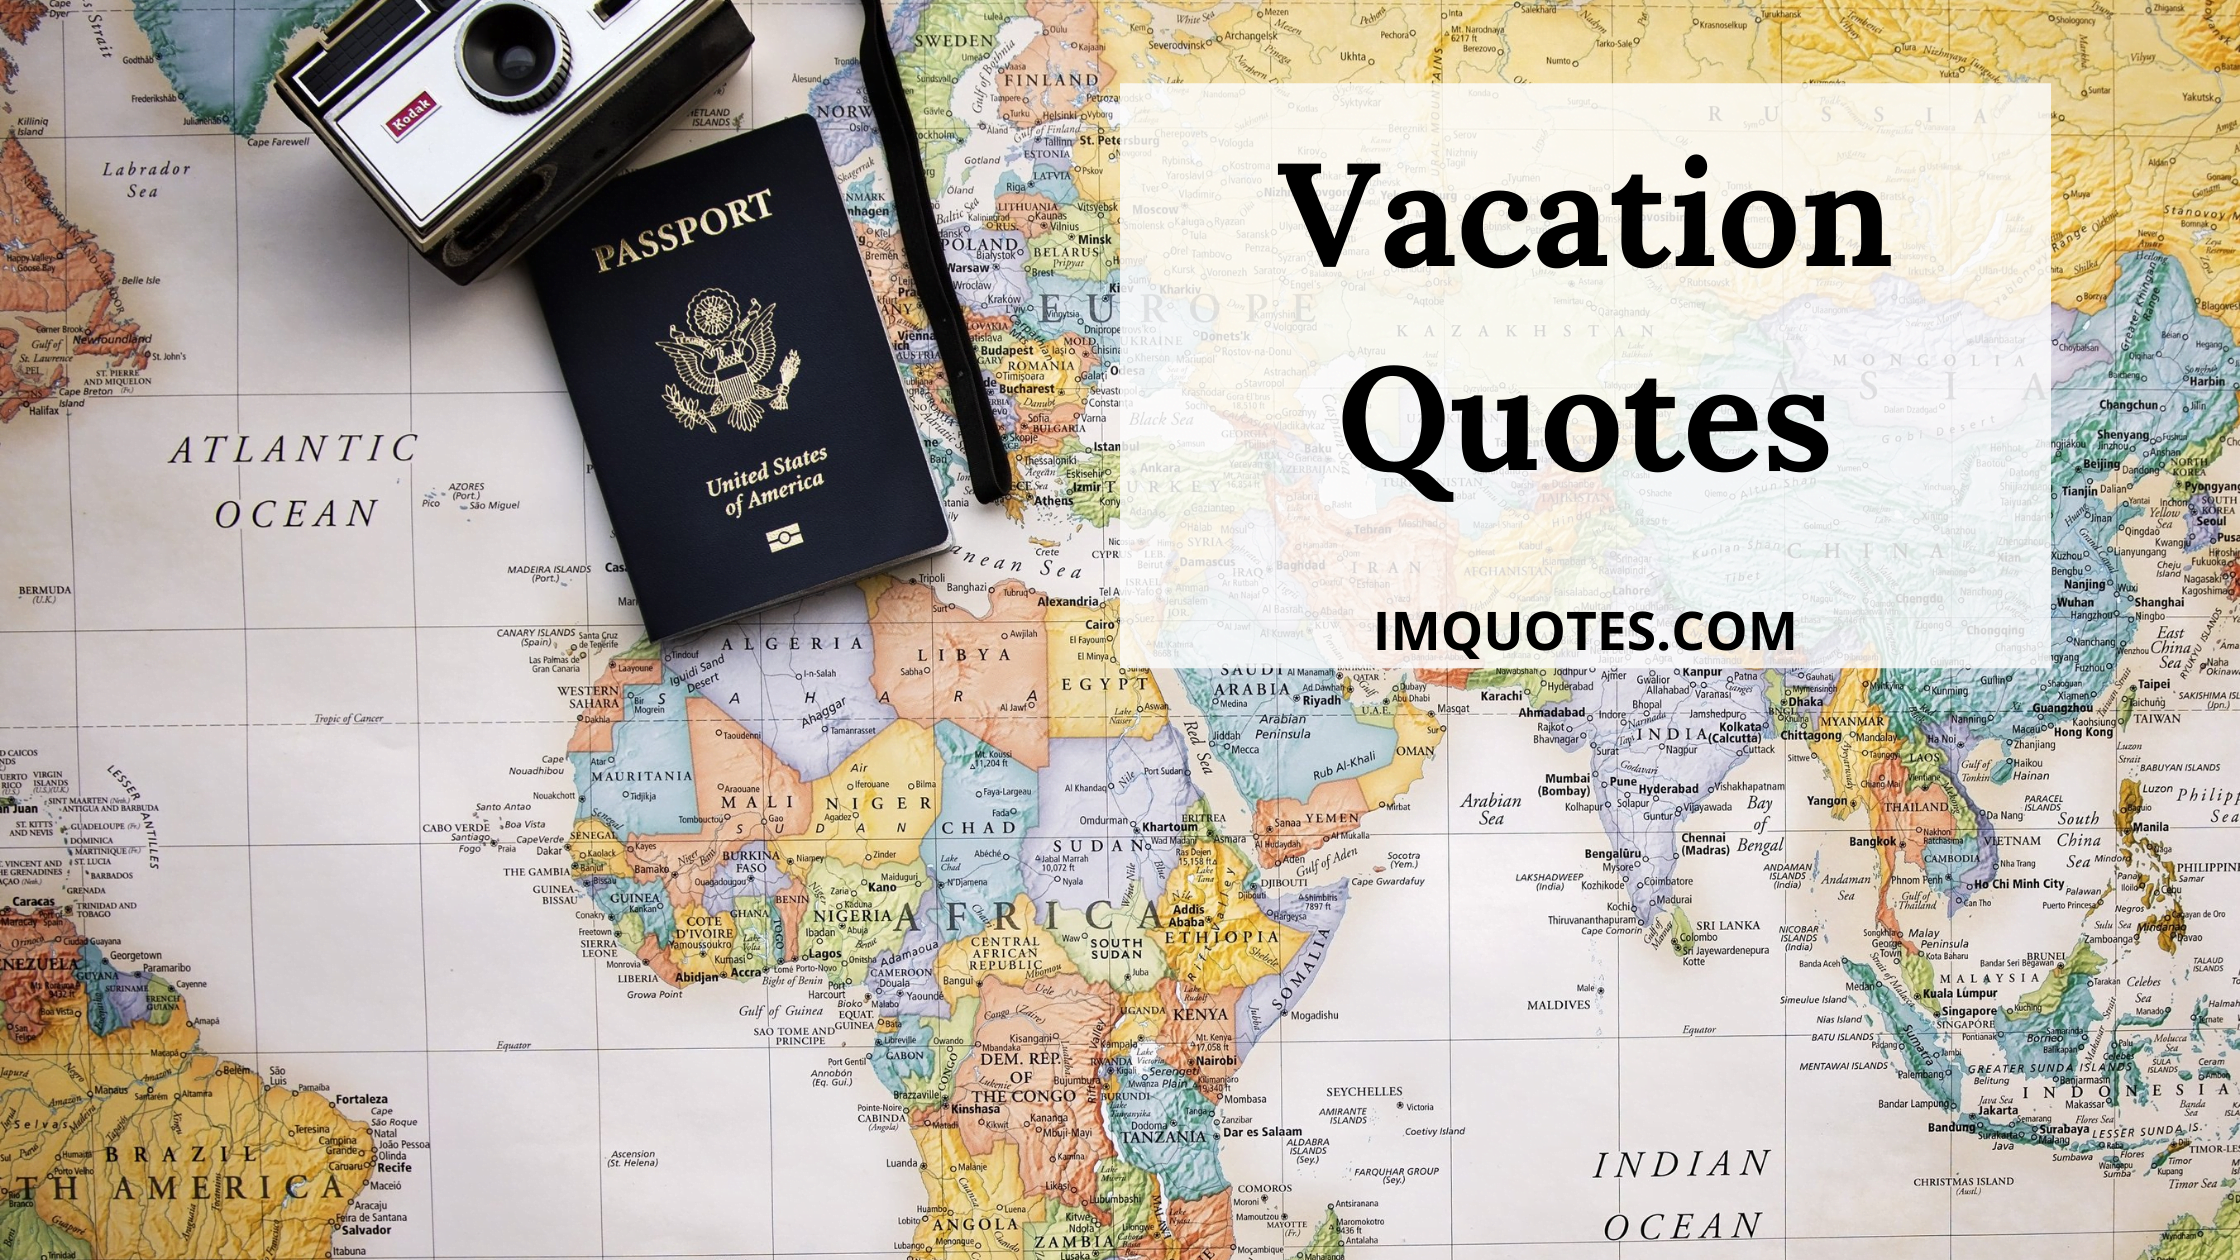 Vacation Quotes1